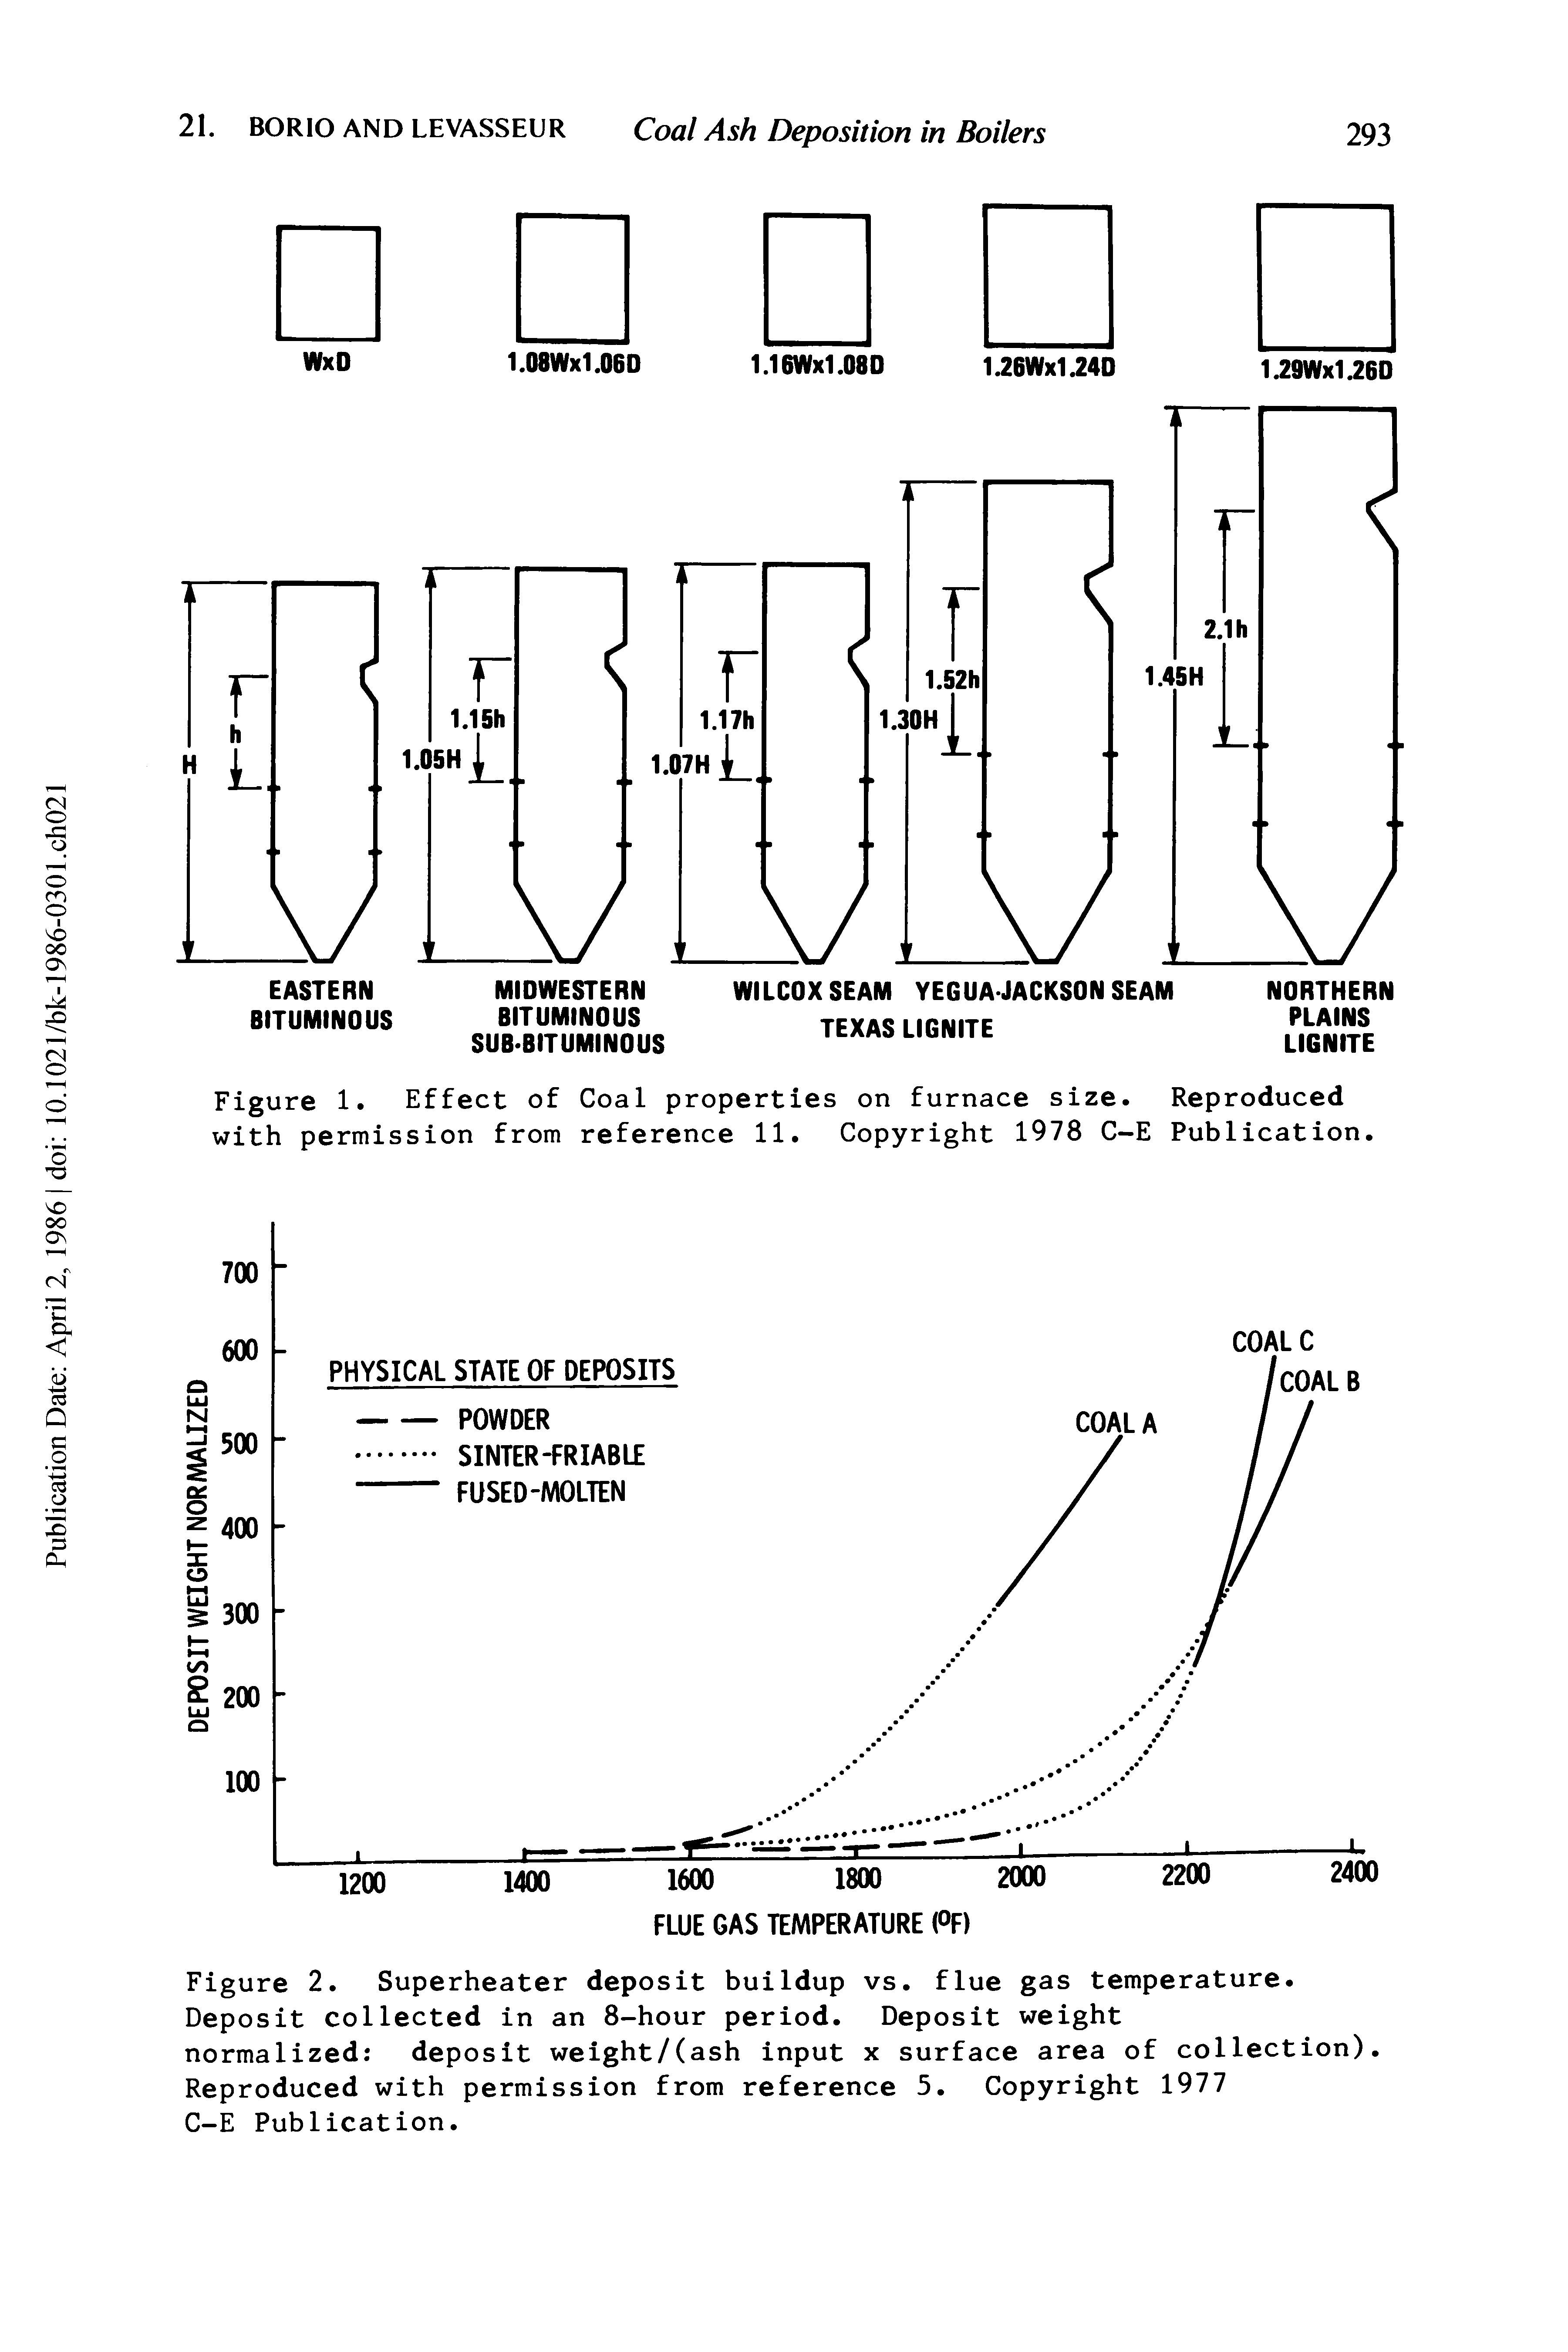 Figure 1. Effect of Coal properties on furnace size. Reproduced with permission from reference 11. Copyright 1978 C-E Publication.